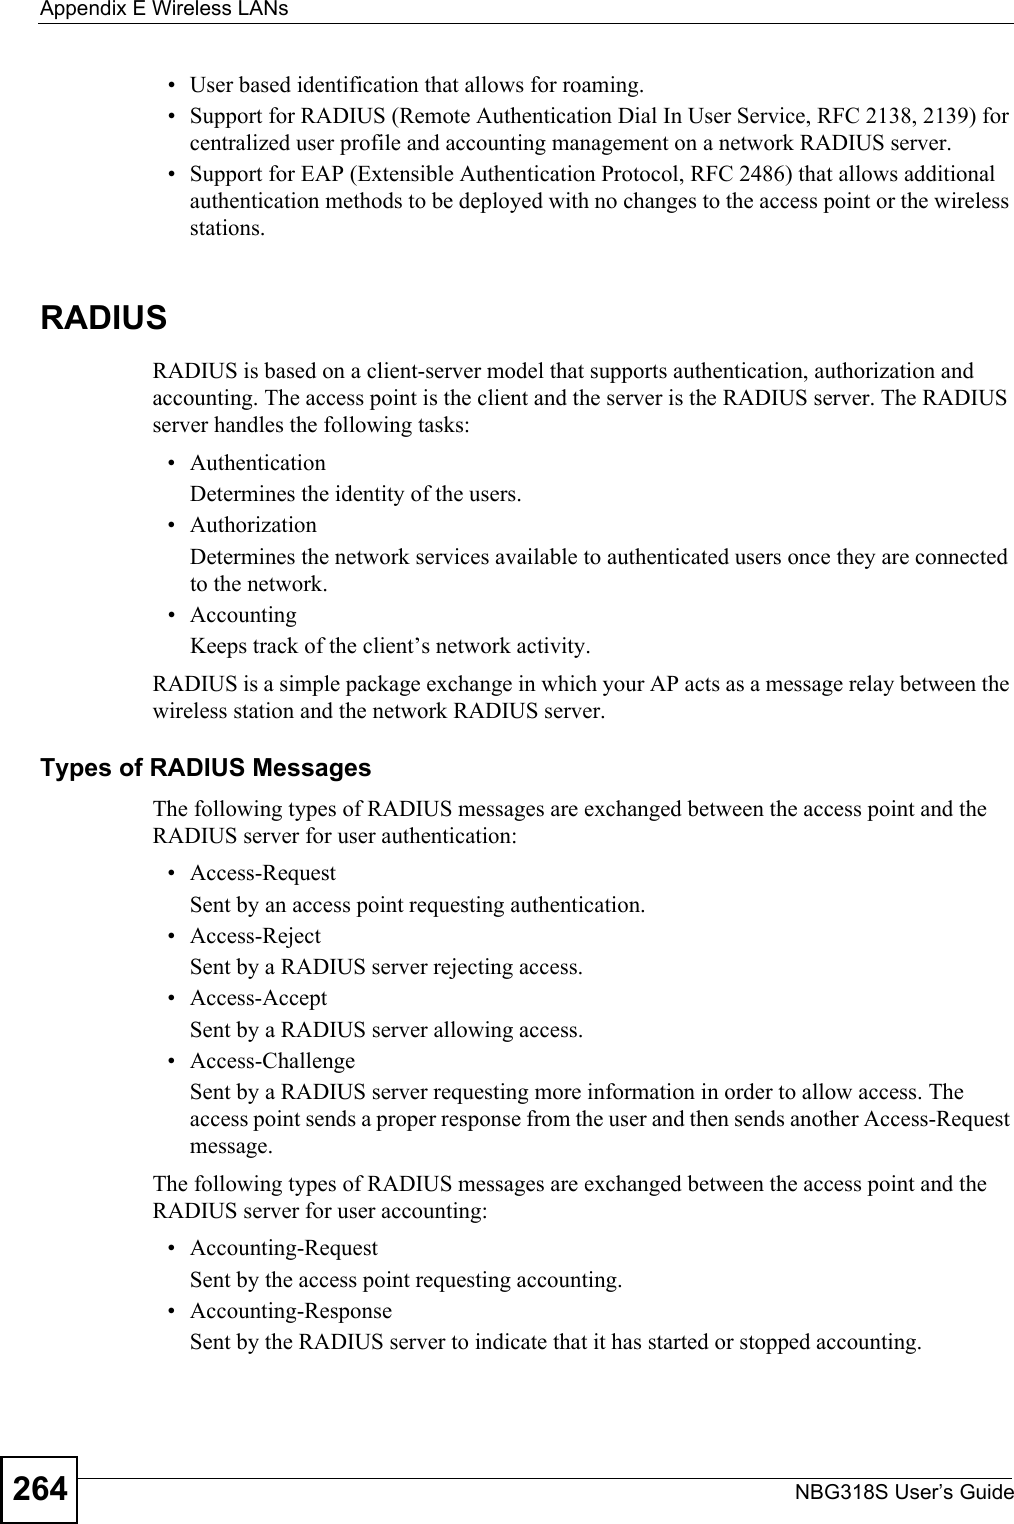 Appendix E Wireless LANsNBG318S User’s Guide264• User based identification that allows for roaming.• Support for RADIUS (Remote Authentication Dial In User Service, RFC 2138, 2139) for centralized user profile and accounting management on a network RADIUS server. • Support for EAP (Extensible Authentication Protocol, RFC 2486) that allows additional authentication methods to be deployed with no changes to the access point or the wireless stations. RADIUSRADIUS is based on a client-server model that supports authentication, authorization and accounting. The access point is the client and the server is the RADIUS server. The RADIUS server handles the following tasks:• Authentication Determines the identity of the users.• AuthorizationDetermines the network services available to authenticated users once they are connected to the network.• AccountingKeeps track of the client’s network activity. RADIUS is a simple package exchange in which your AP acts as a message relay between the wireless station and the network RADIUS server. Types of RADIUS MessagesThe following types of RADIUS messages are exchanged between the access point and the RADIUS server for user authentication:• Access-RequestSent by an access point requesting authentication.• Access-RejectSent by a RADIUS server rejecting access.• Access-AcceptSent by a RADIUS server allowing access. • Access-ChallengeSent by a RADIUS server requesting more information in order to allow access. The access point sends a proper response from the user and then sends another Access-Request message. The following types of RADIUS messages are exchanged between the access point and the RADIUS server for user accounting:• Accounting-RequestSent by the access point requesting accounting.• Accounting-ResponseSent by the RADIUS server to indicate that it has started or stopped accounting. 